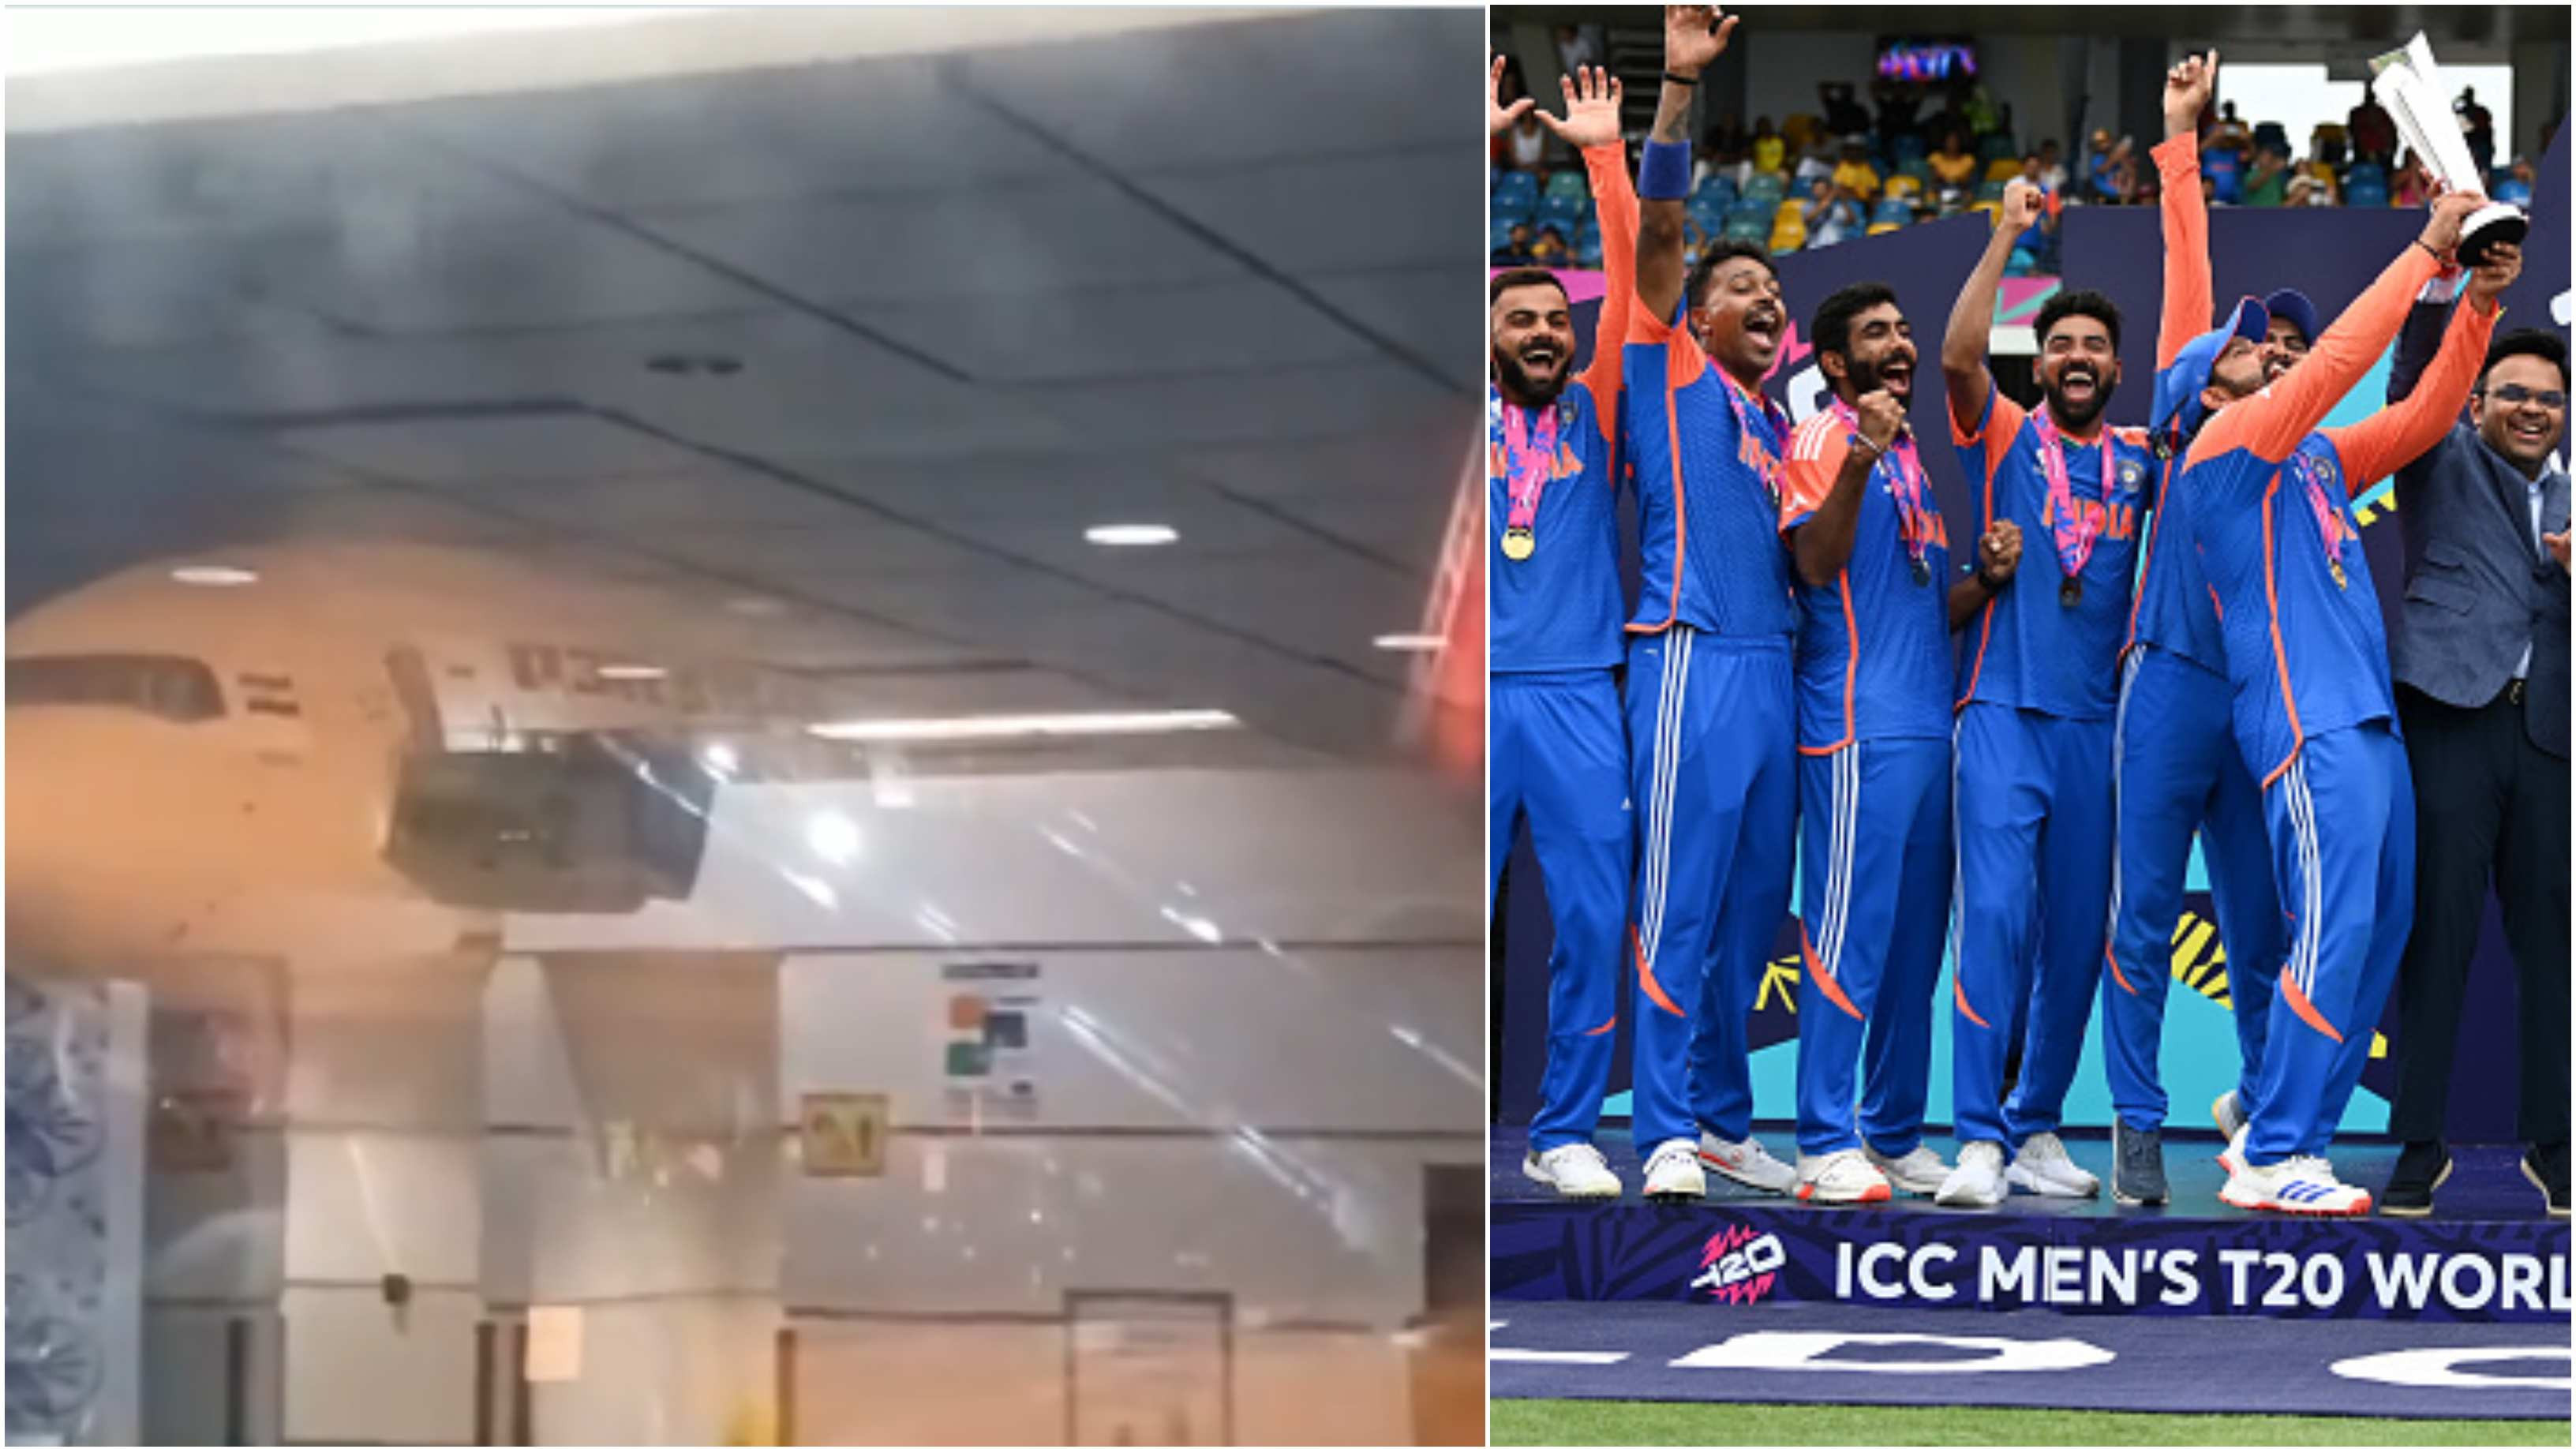 WATCH: Special Air India chartered flight arrive at Barbados Airport to bring T20 World Cup-winning Indian team home